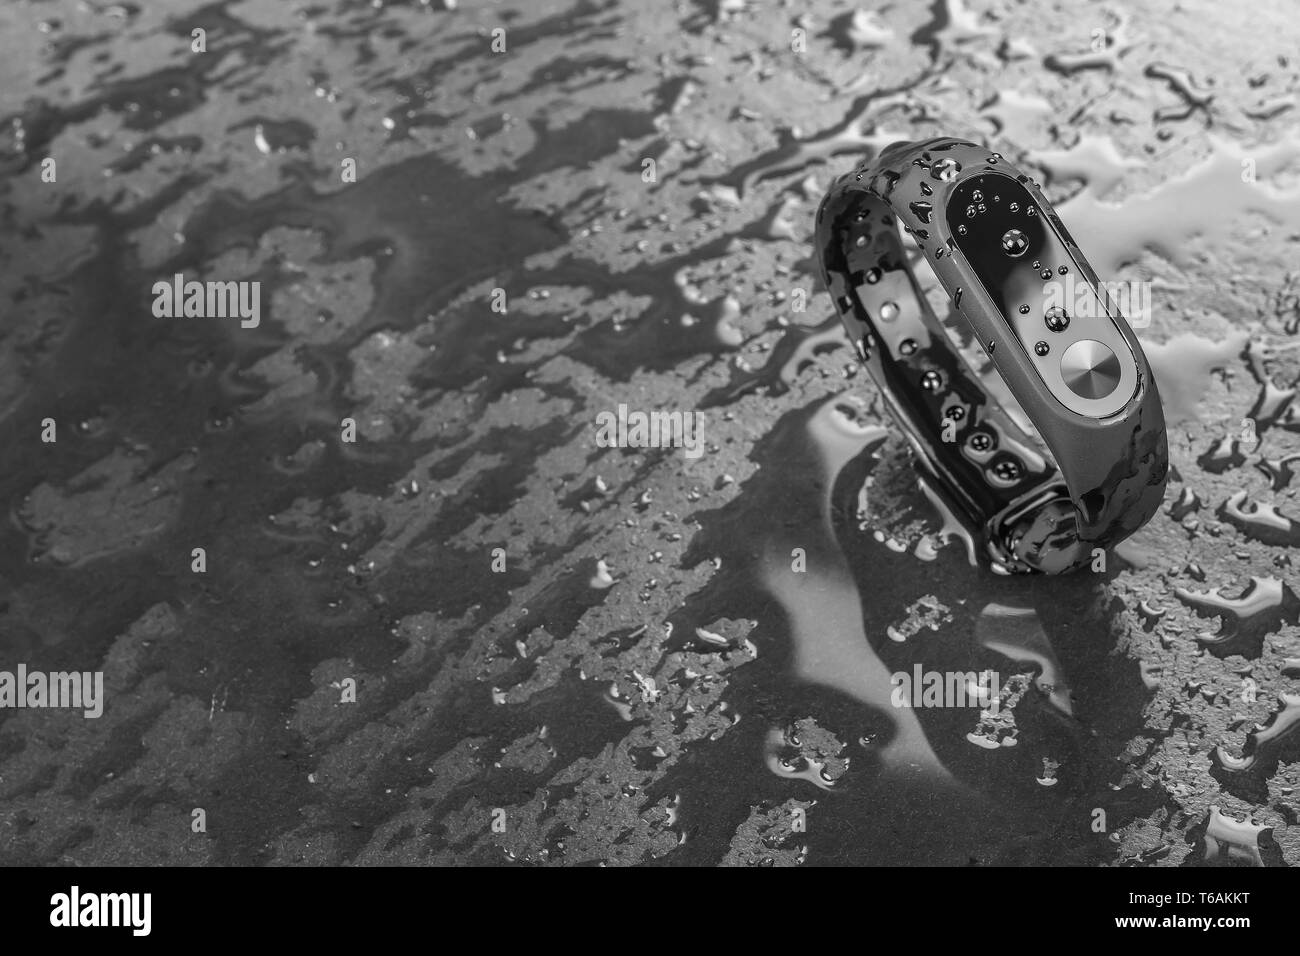 wet fitness bracelet, fitness tracker on a black slate background with drops of water Stock Photo